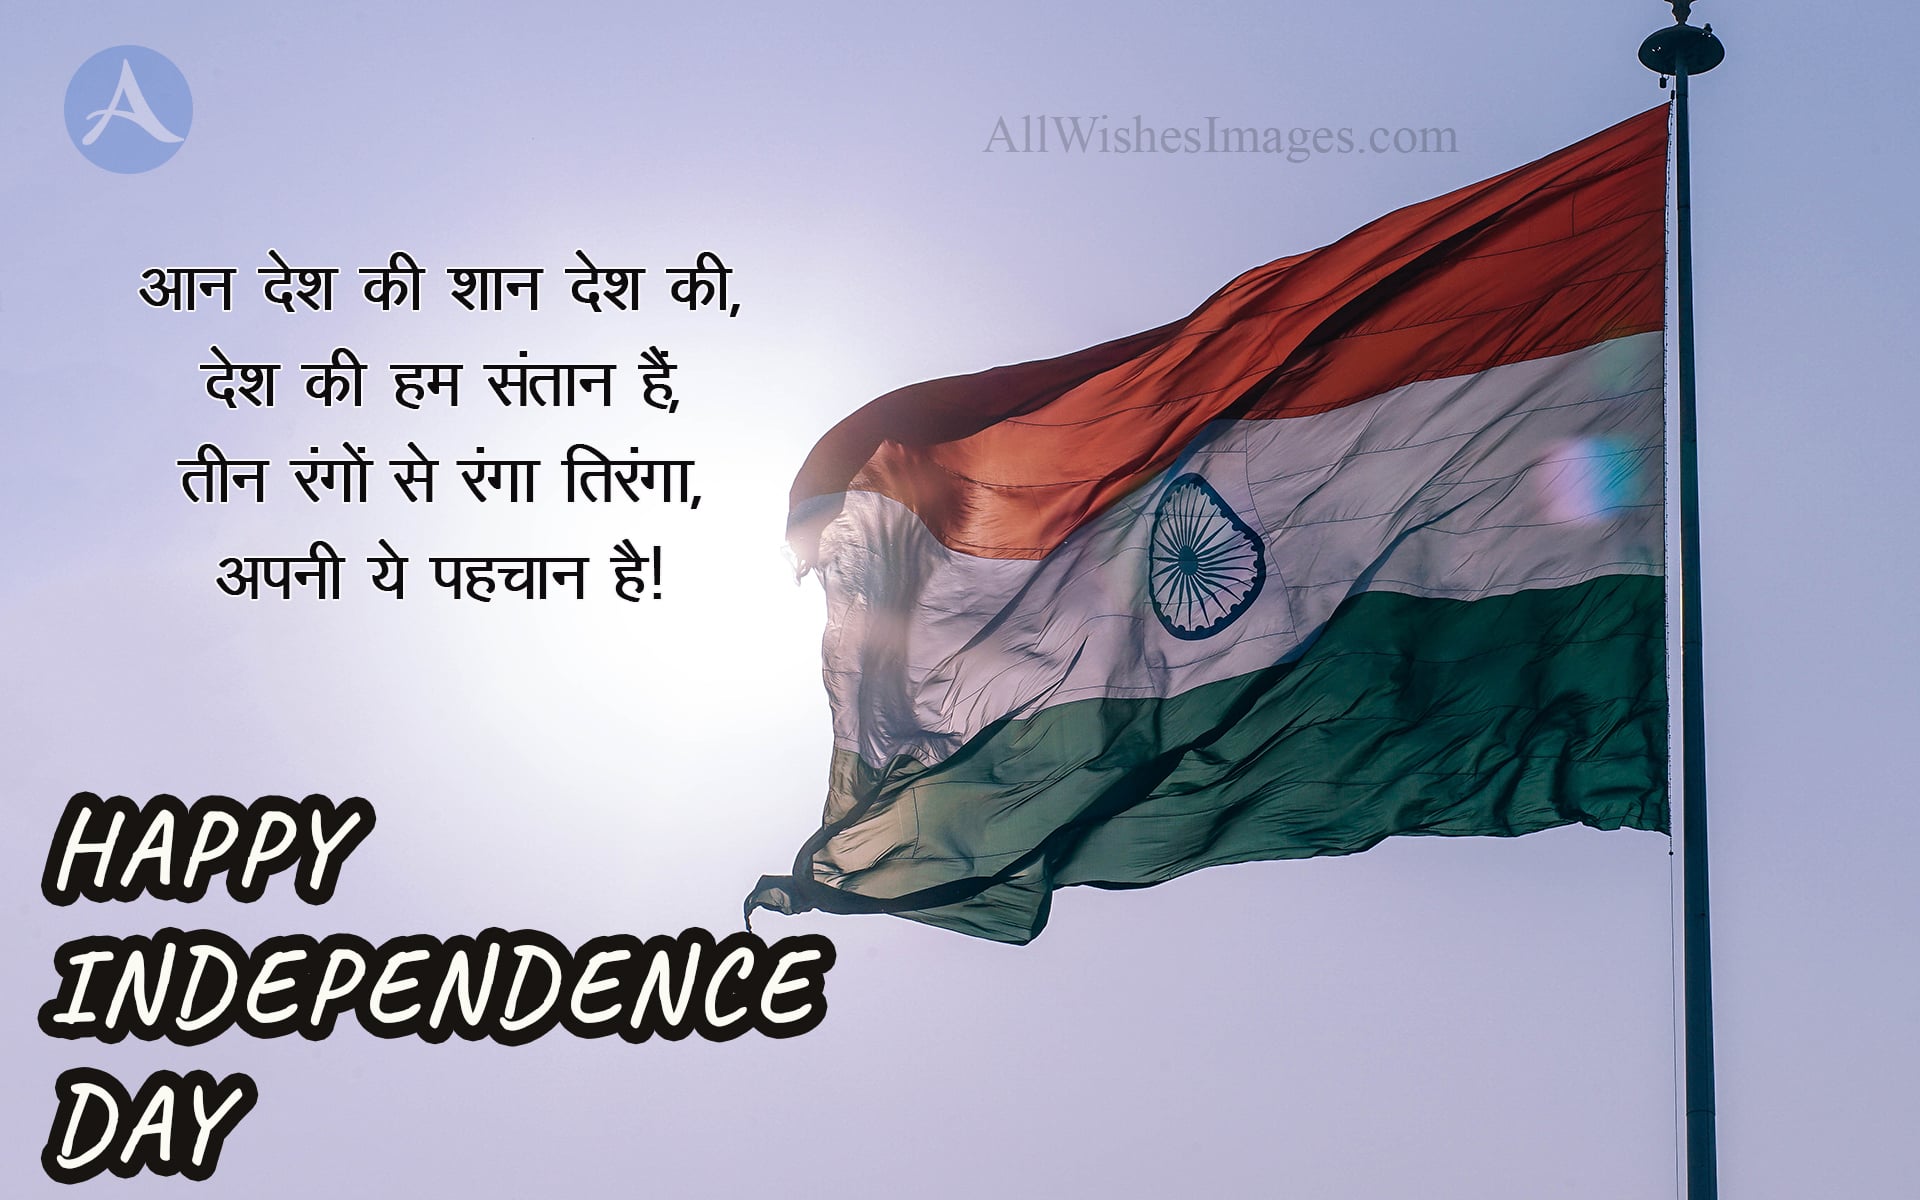 happy independence day shayari with images - All Wishes Images - Images for  WhatsApp